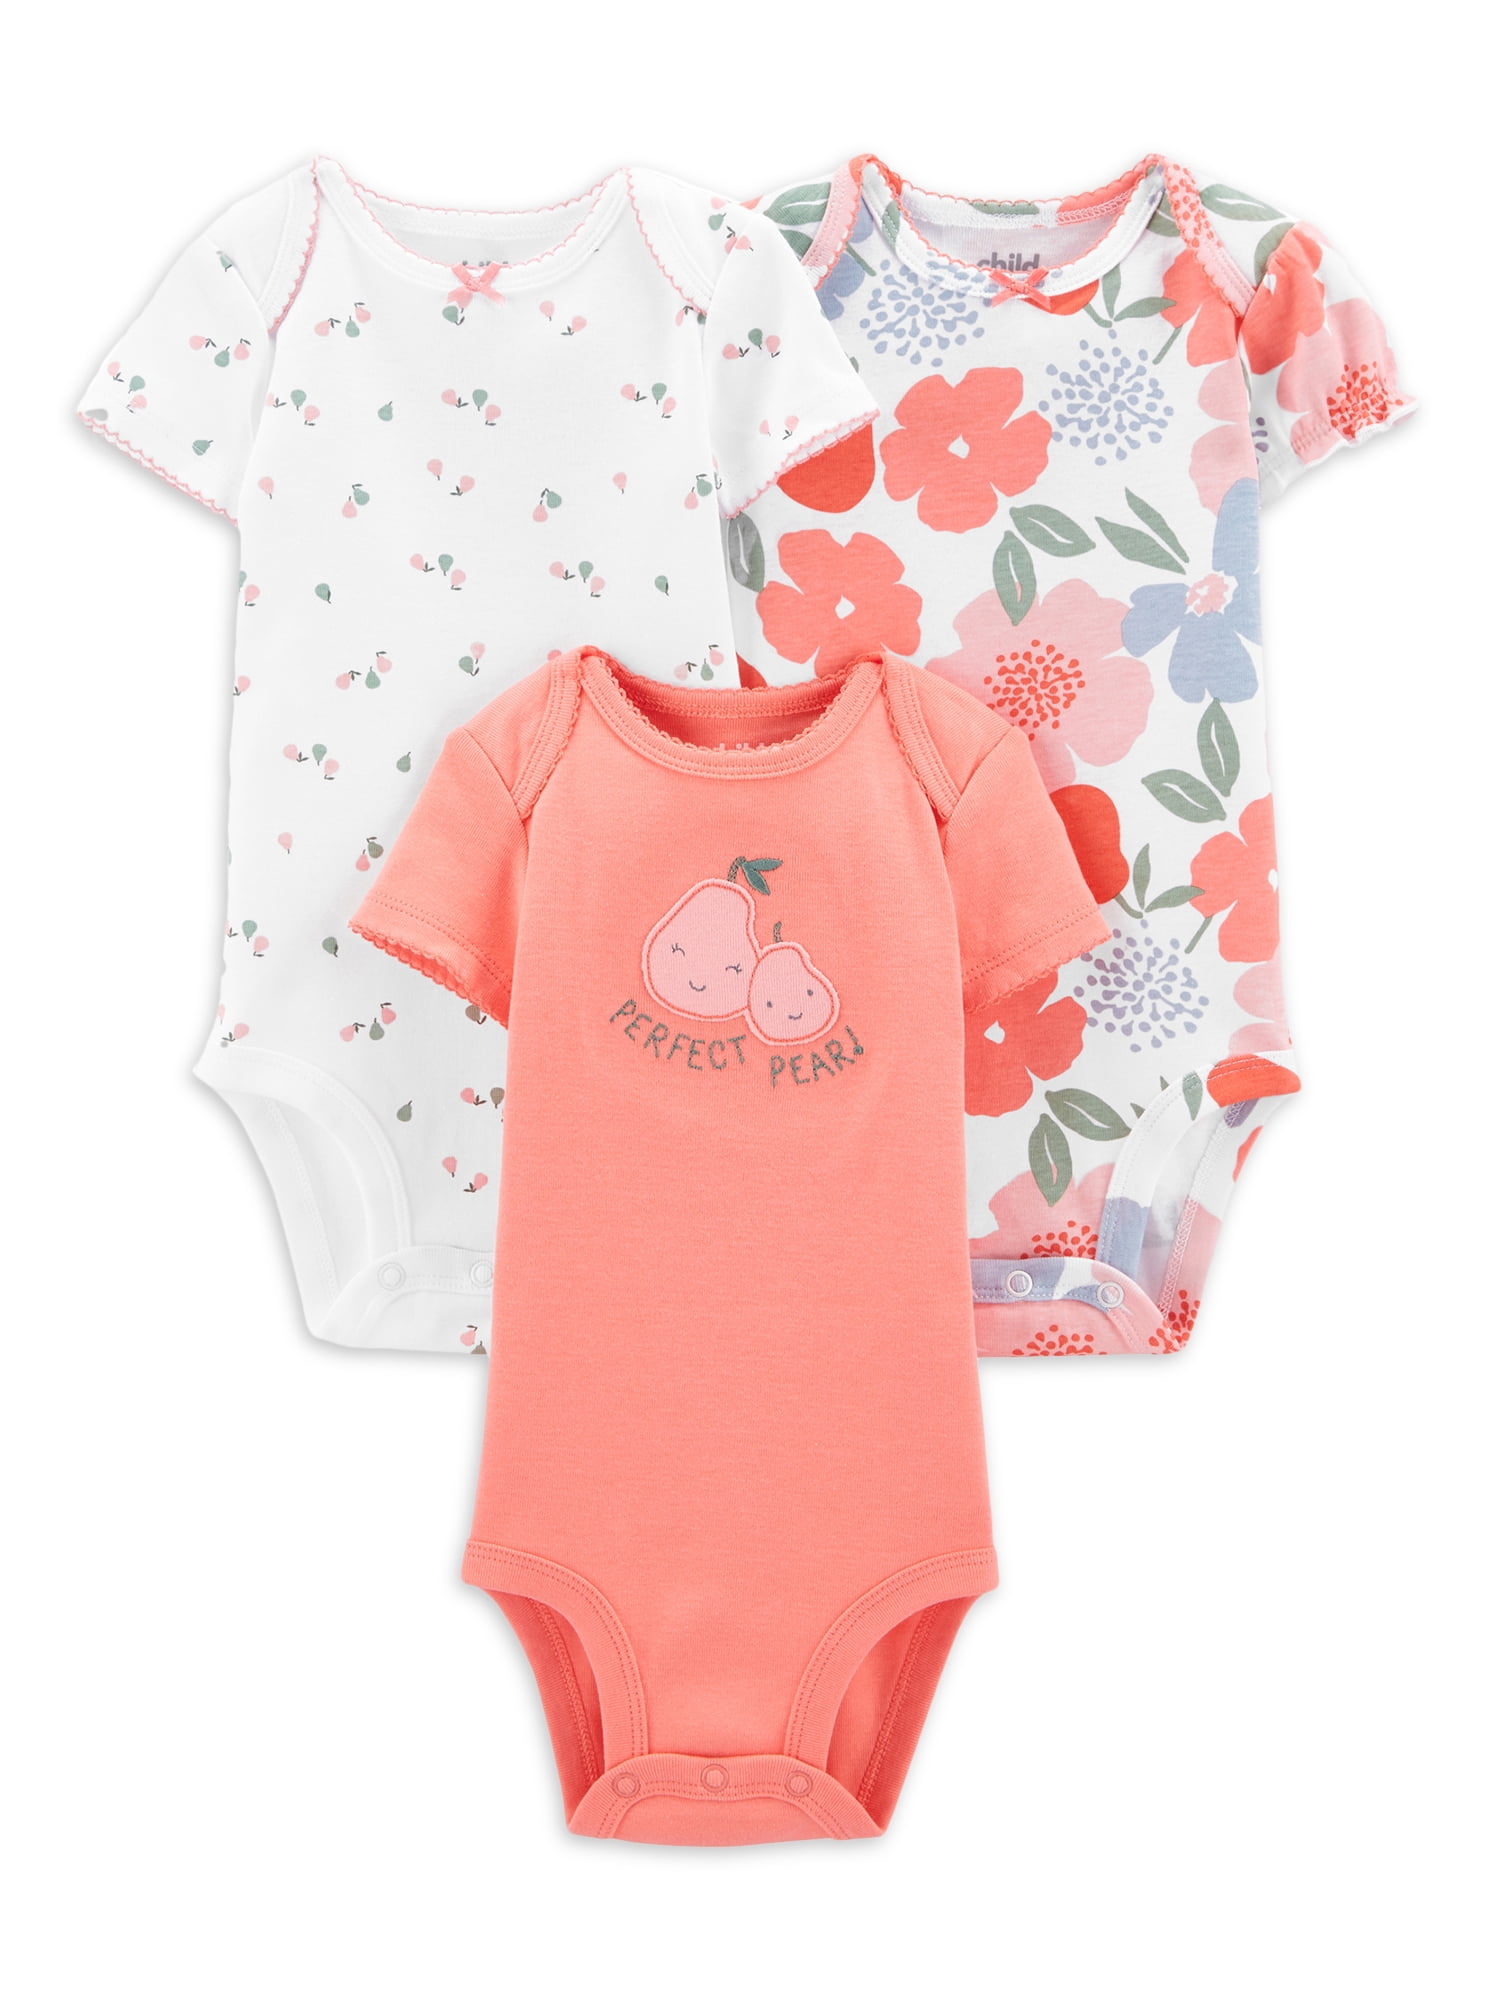 Carter's Child of Mine Baby Girls Coral Bodysuit, 3-Pack, Preemie-18 Months